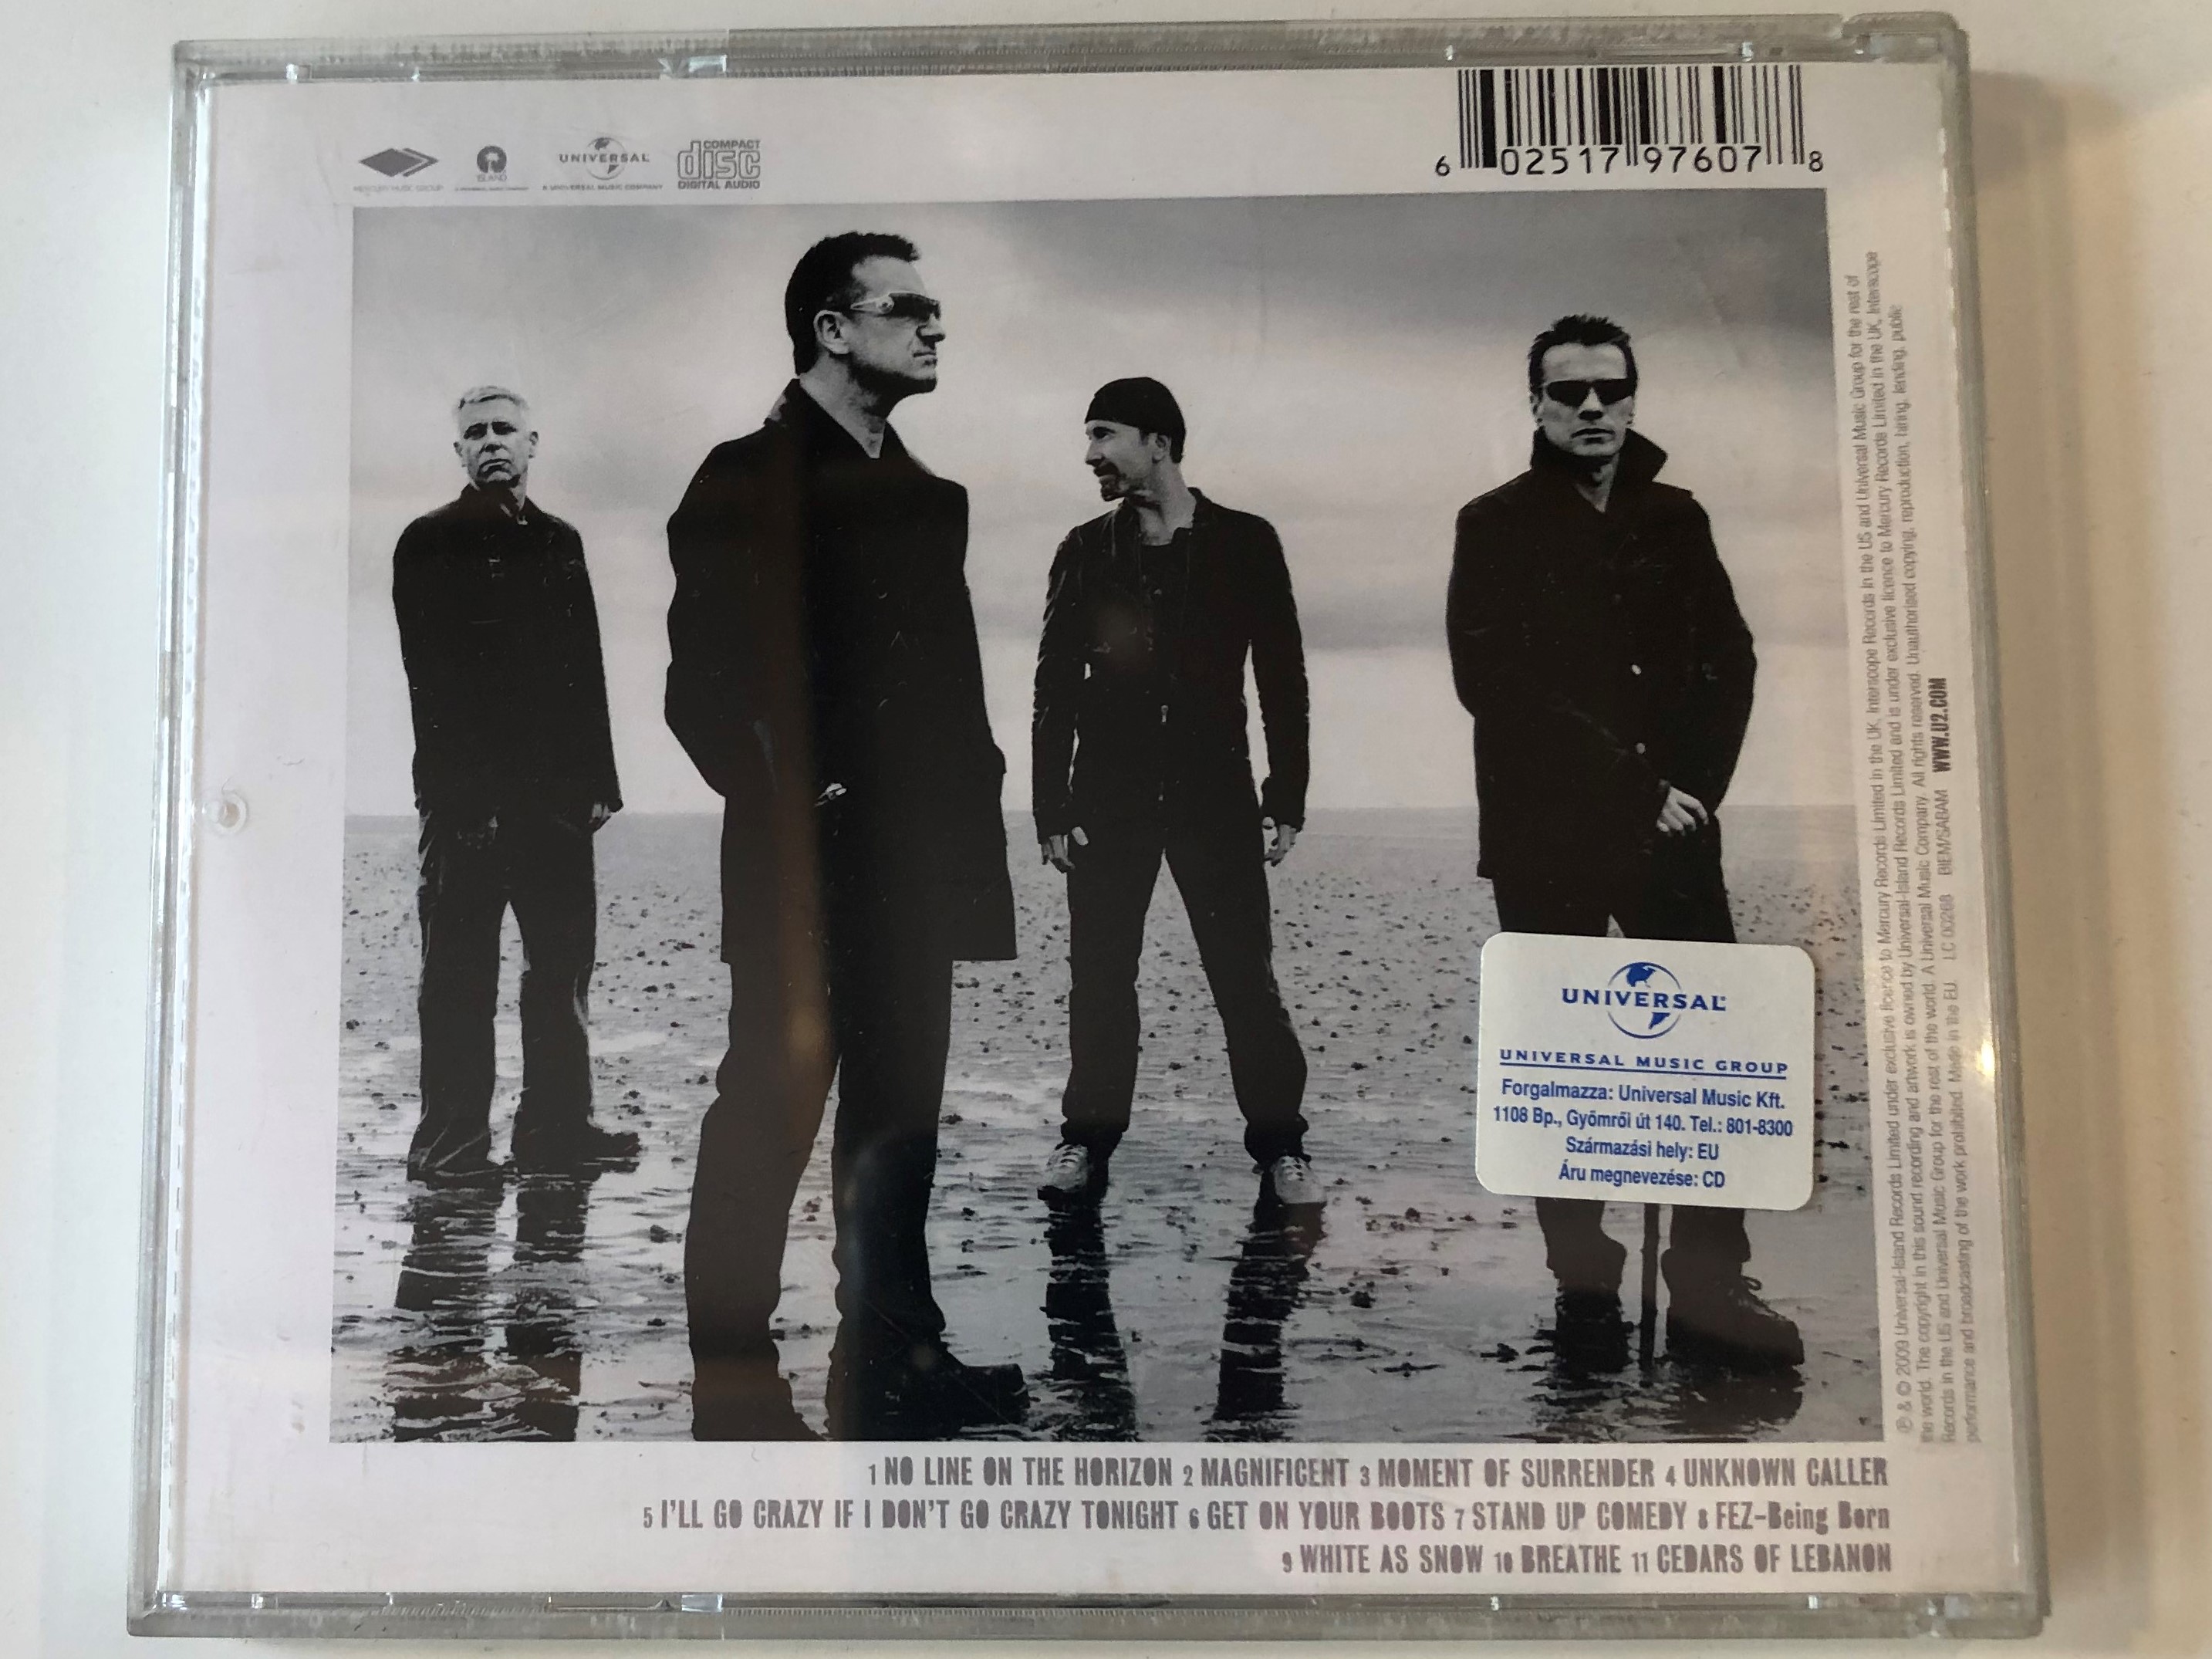 u2-no-line-on-the-horizon-featuring-the-new-single-get-on-your-boots-made-in-hungary-universal-island-records-audio-cd-2009-602517976078-2-.jpg